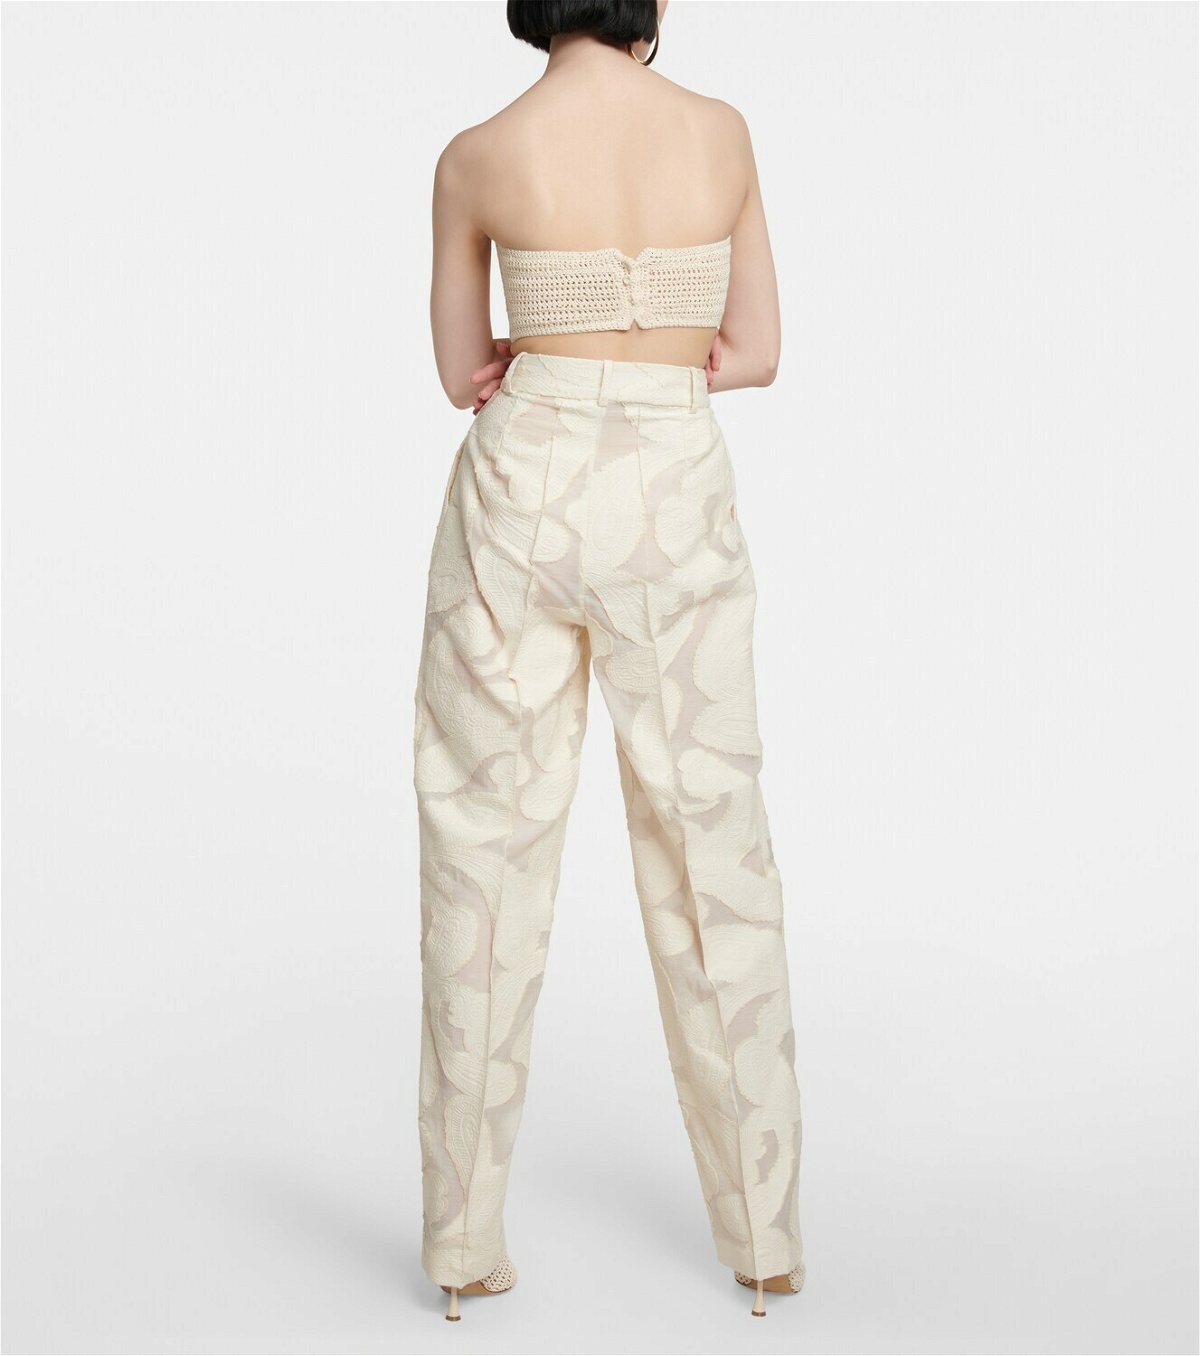 The Mannei Nausa jacquard tapered cotton pants